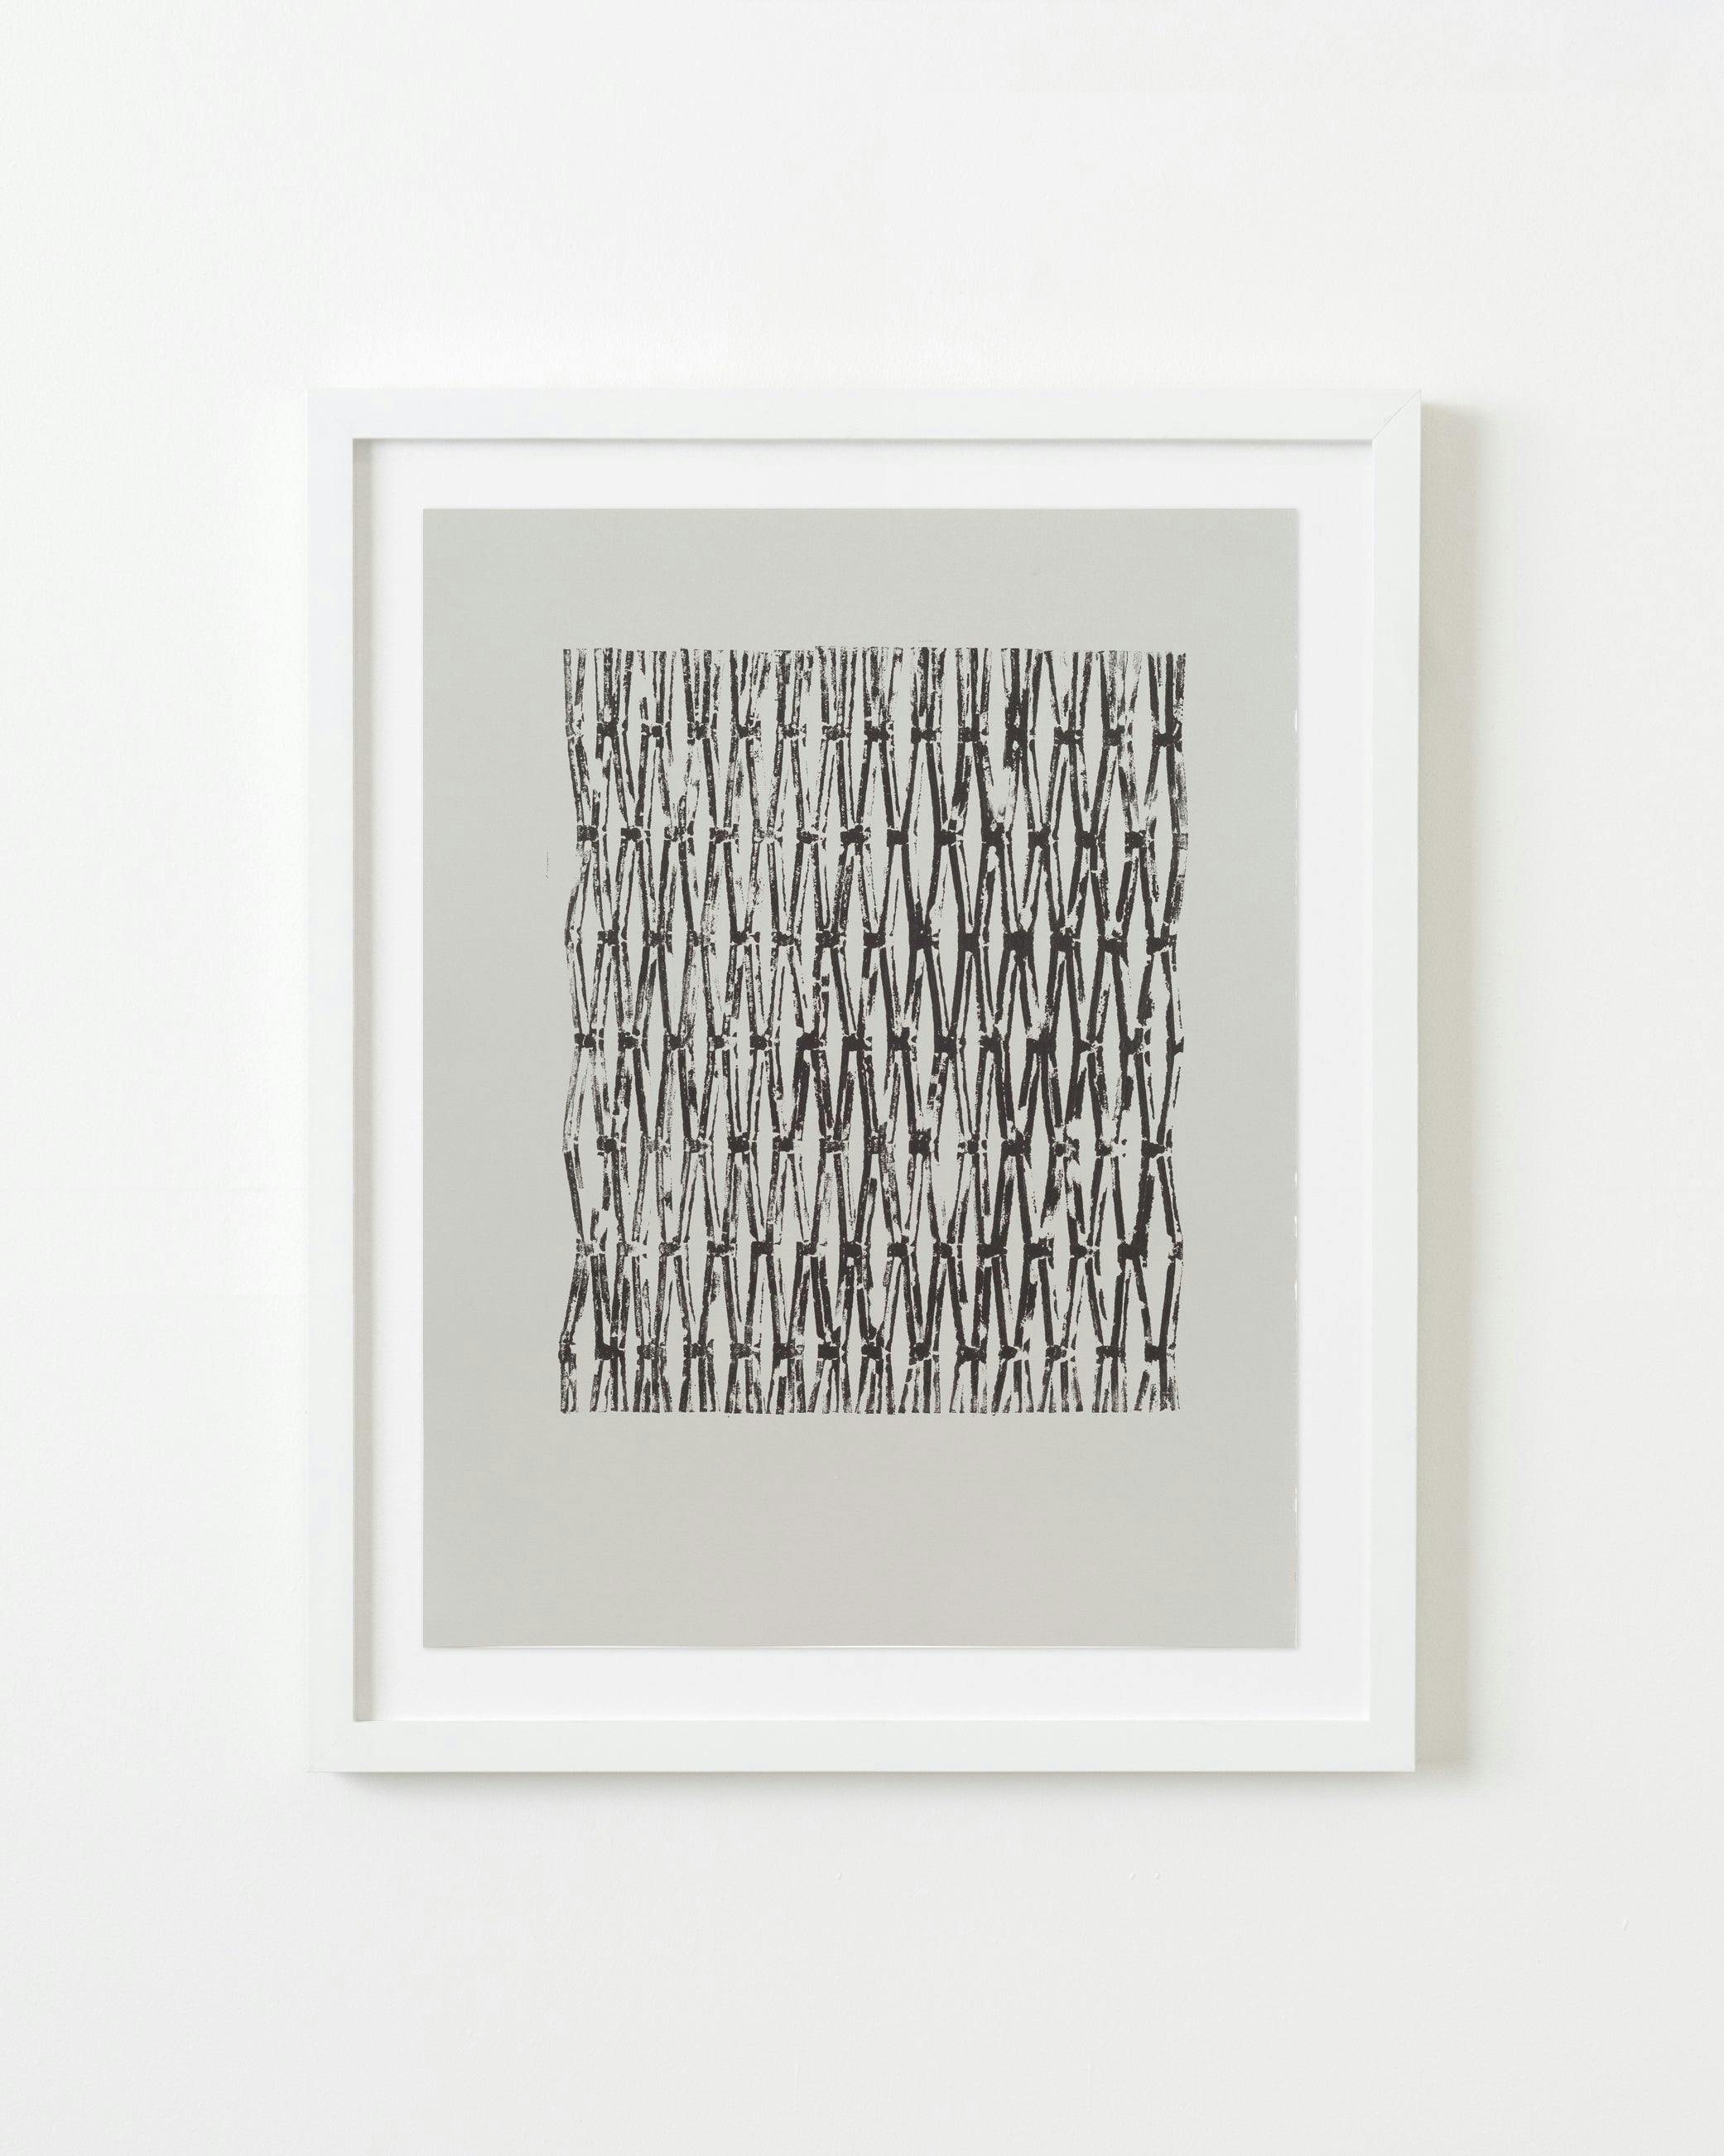 Print by Natalie Beall titled "Index of Function (Traces)".